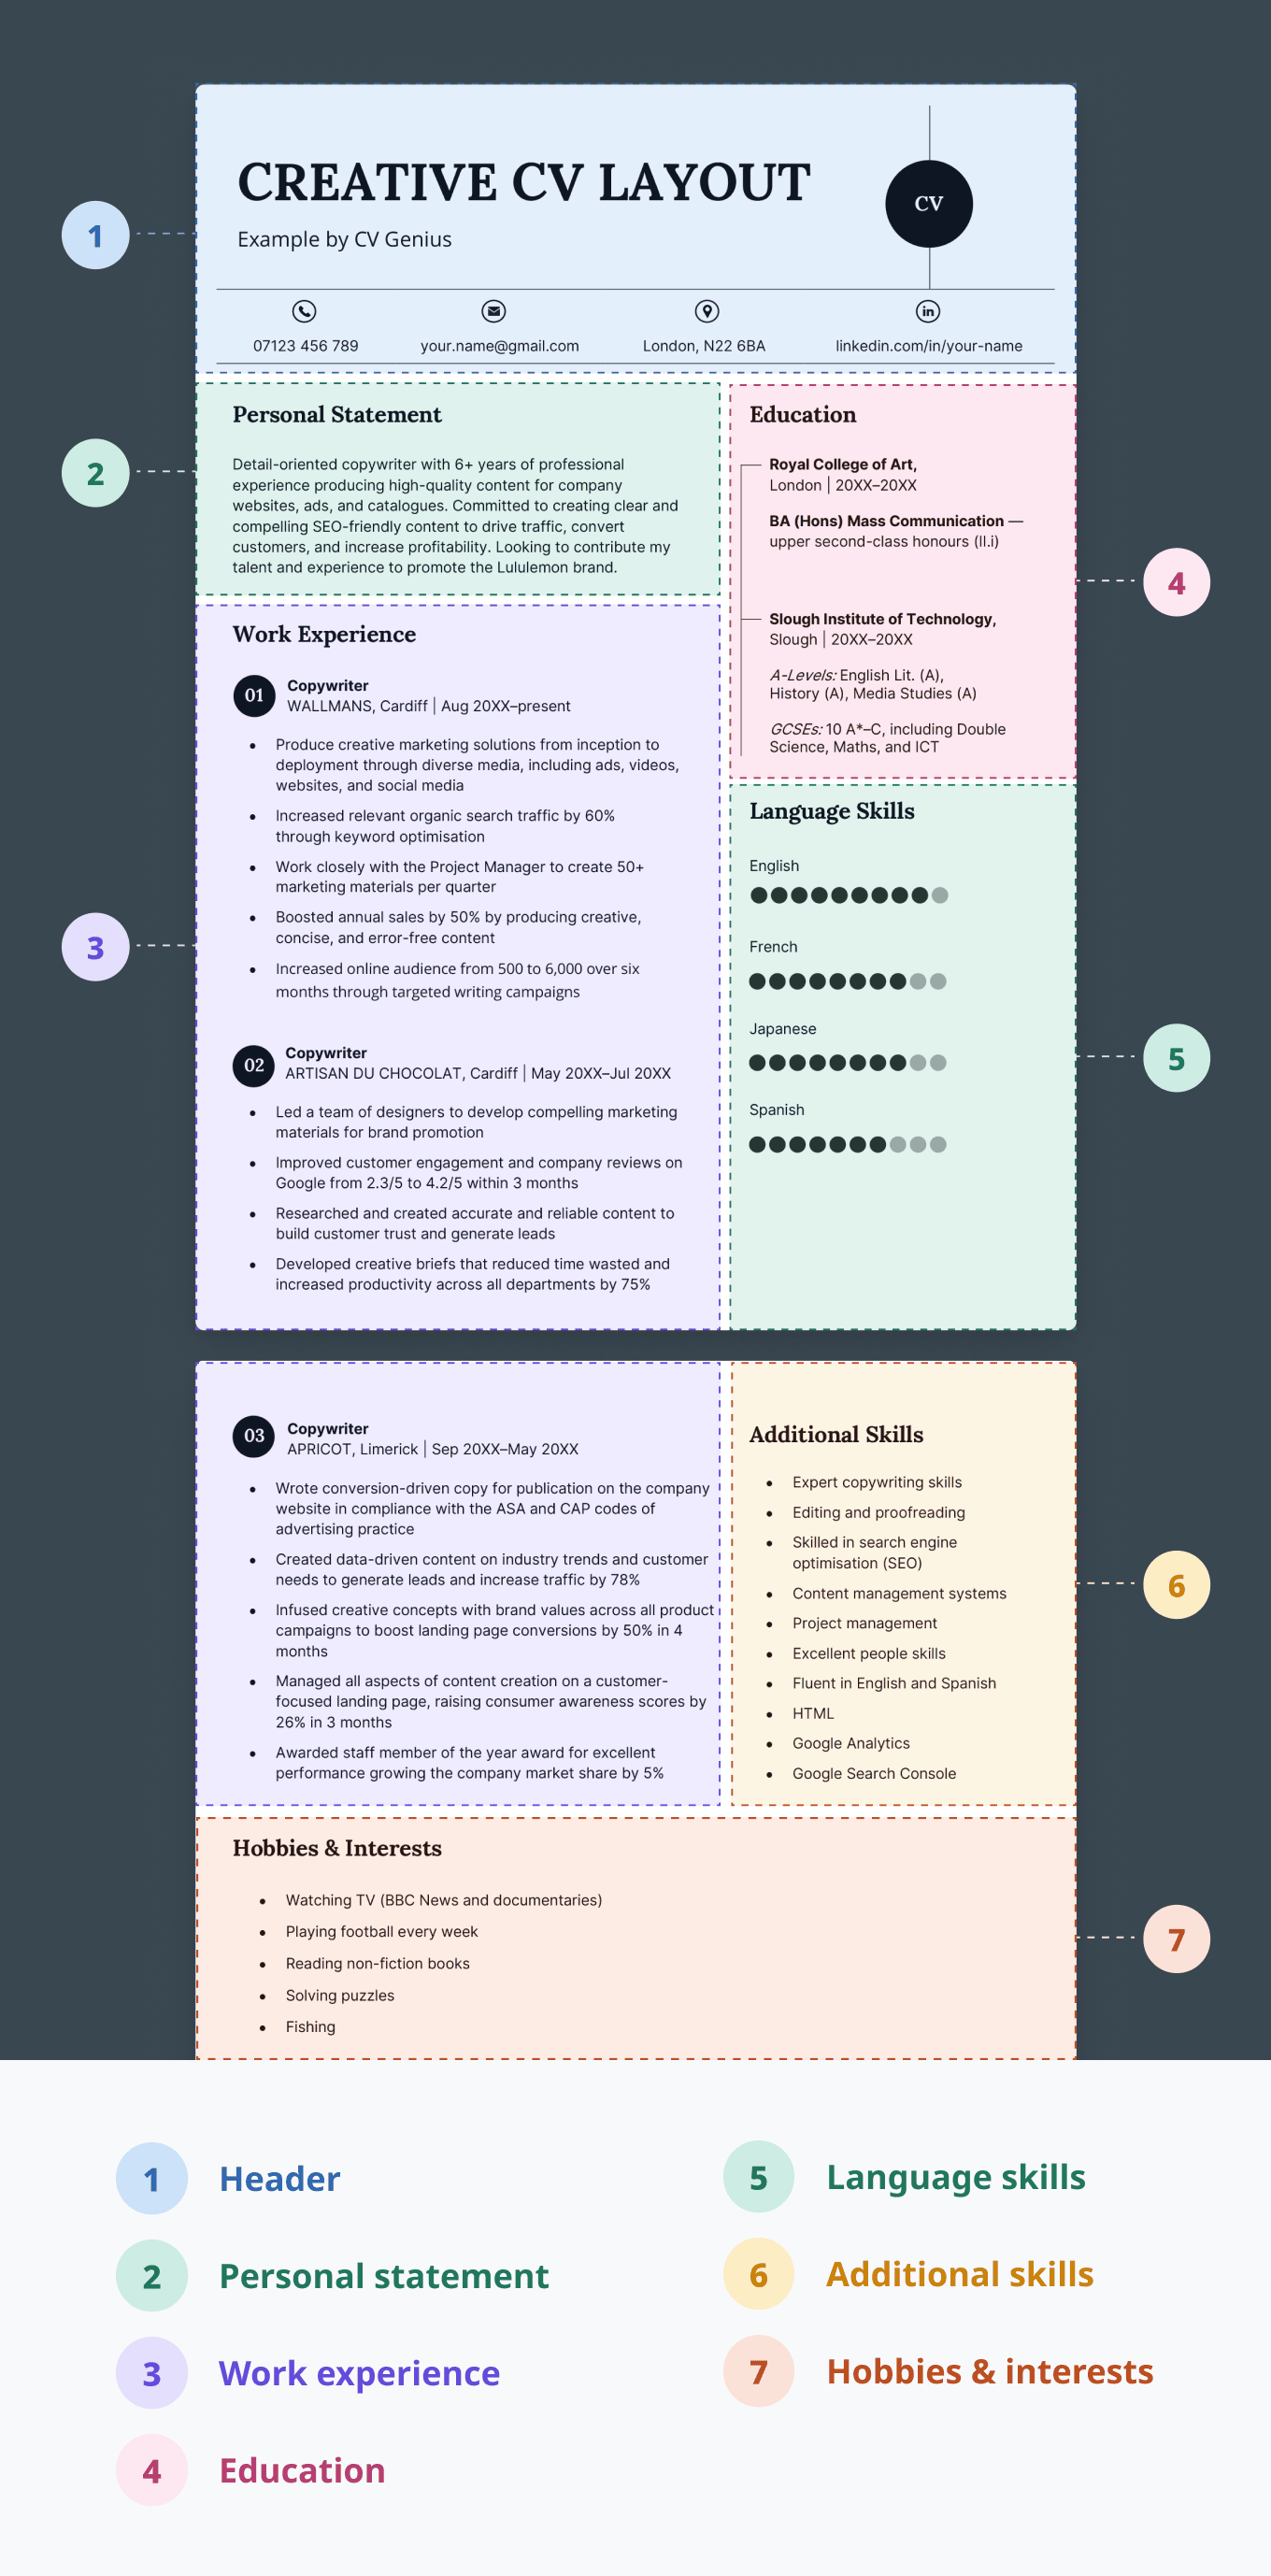 A creative CV layout with colourful numbered annotations showing how the CV sections have been arranged.